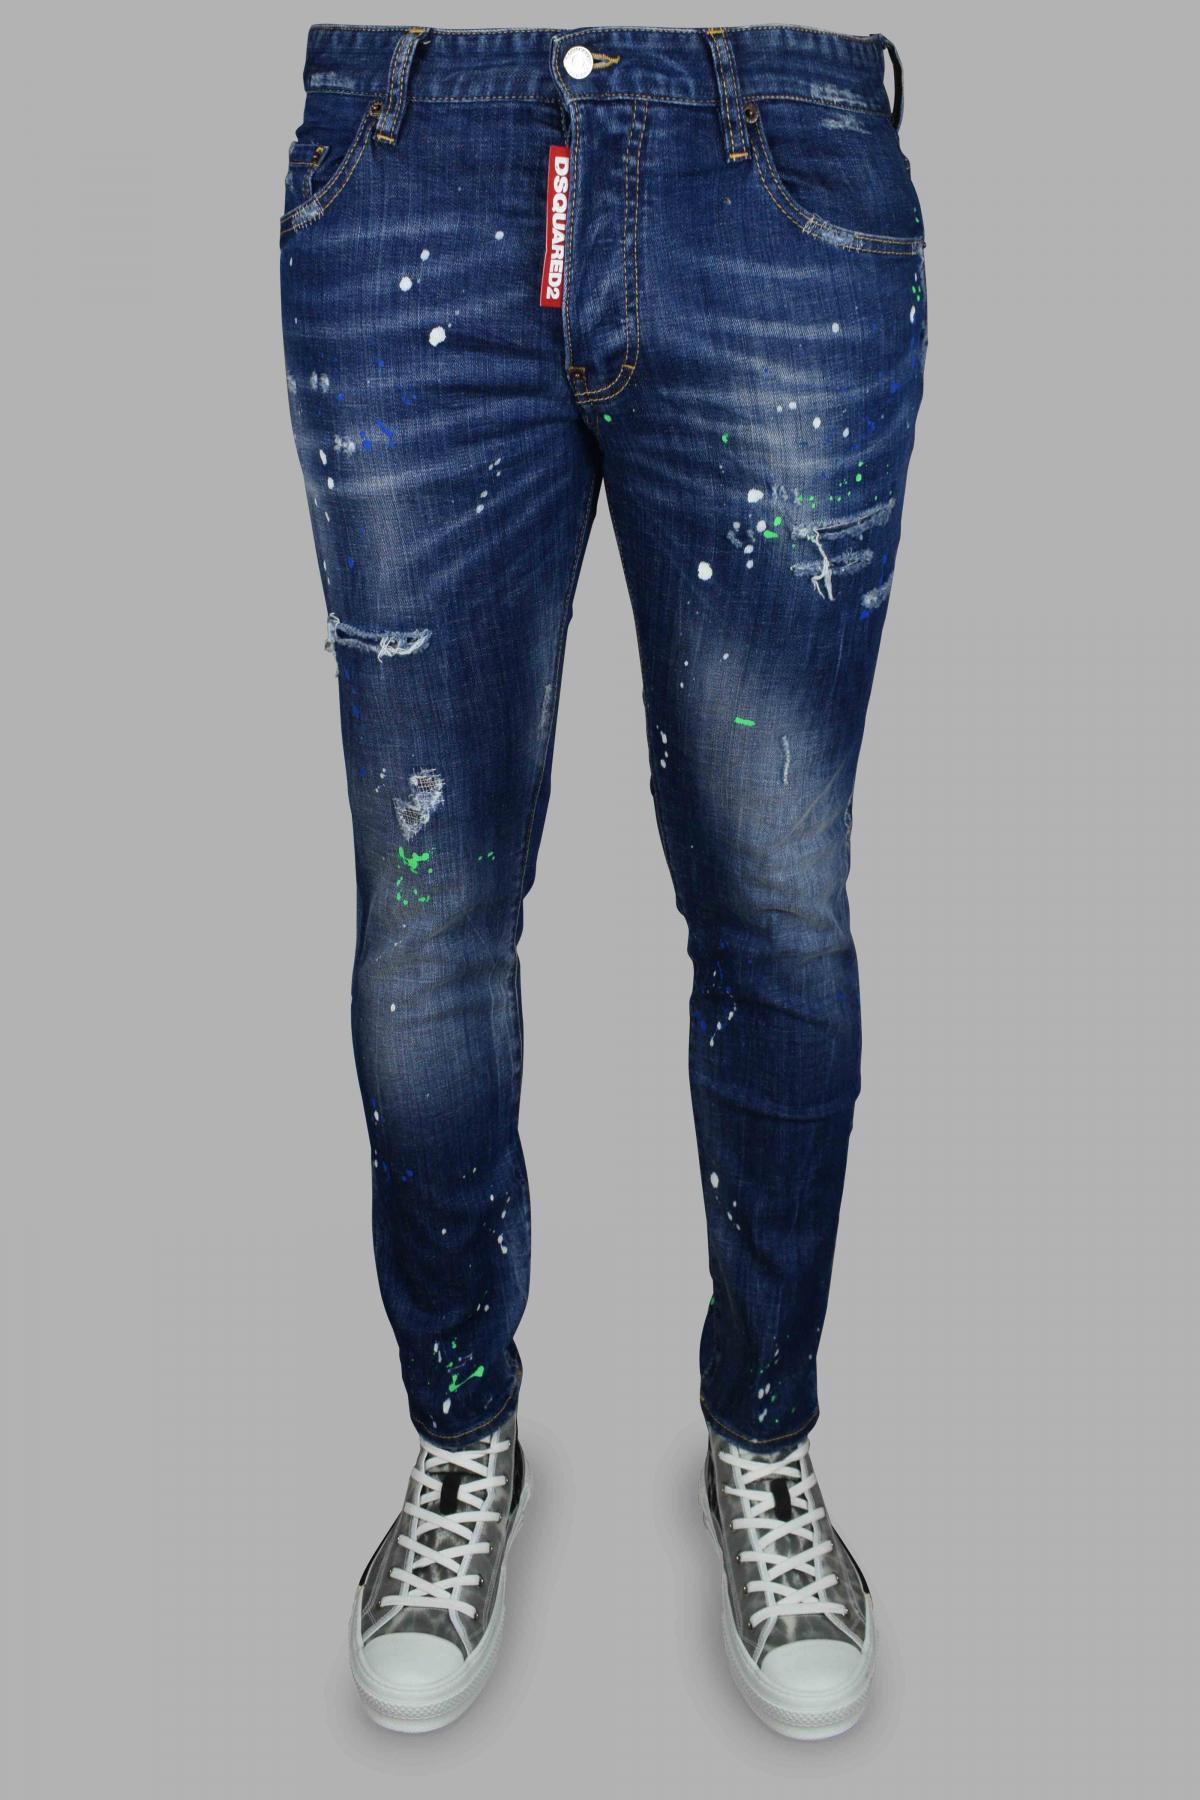 DSquared² Cotton Skater Jean in Blue for Men - Save 6% | Lyst